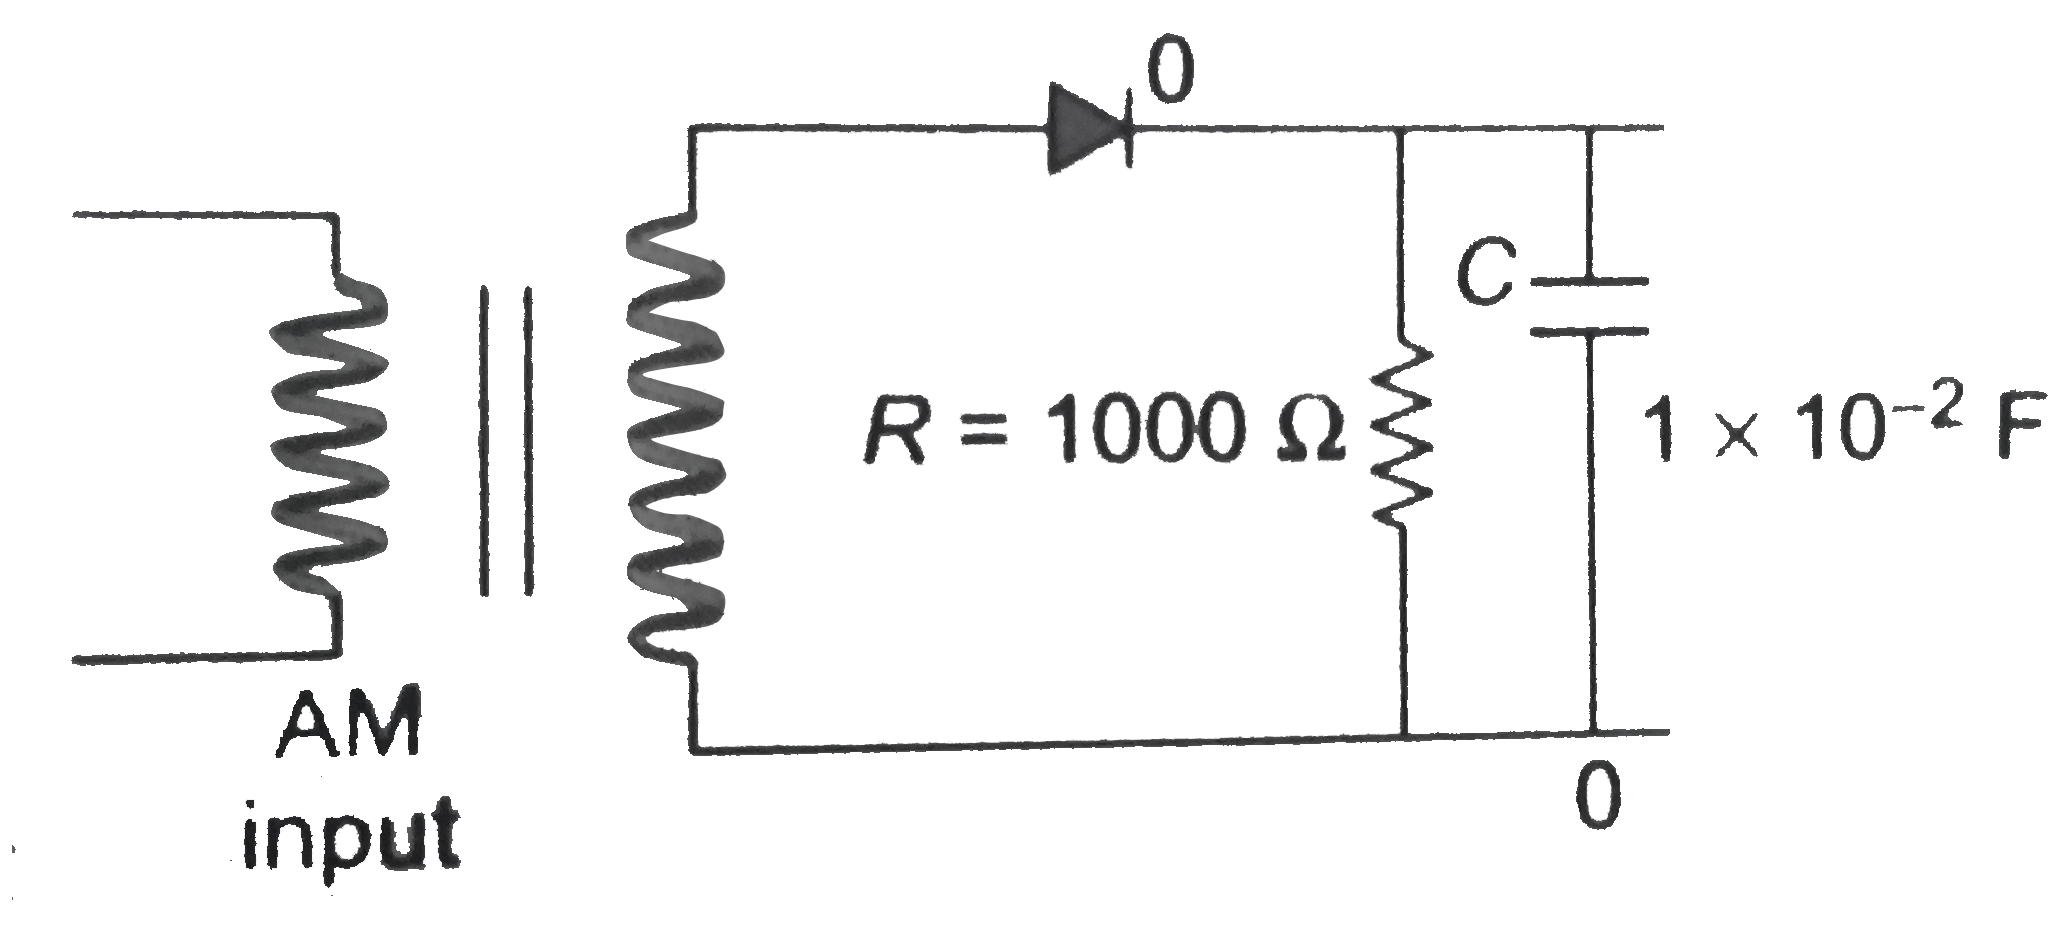 In the given detector circuit, the suitable value of carrier frequency is